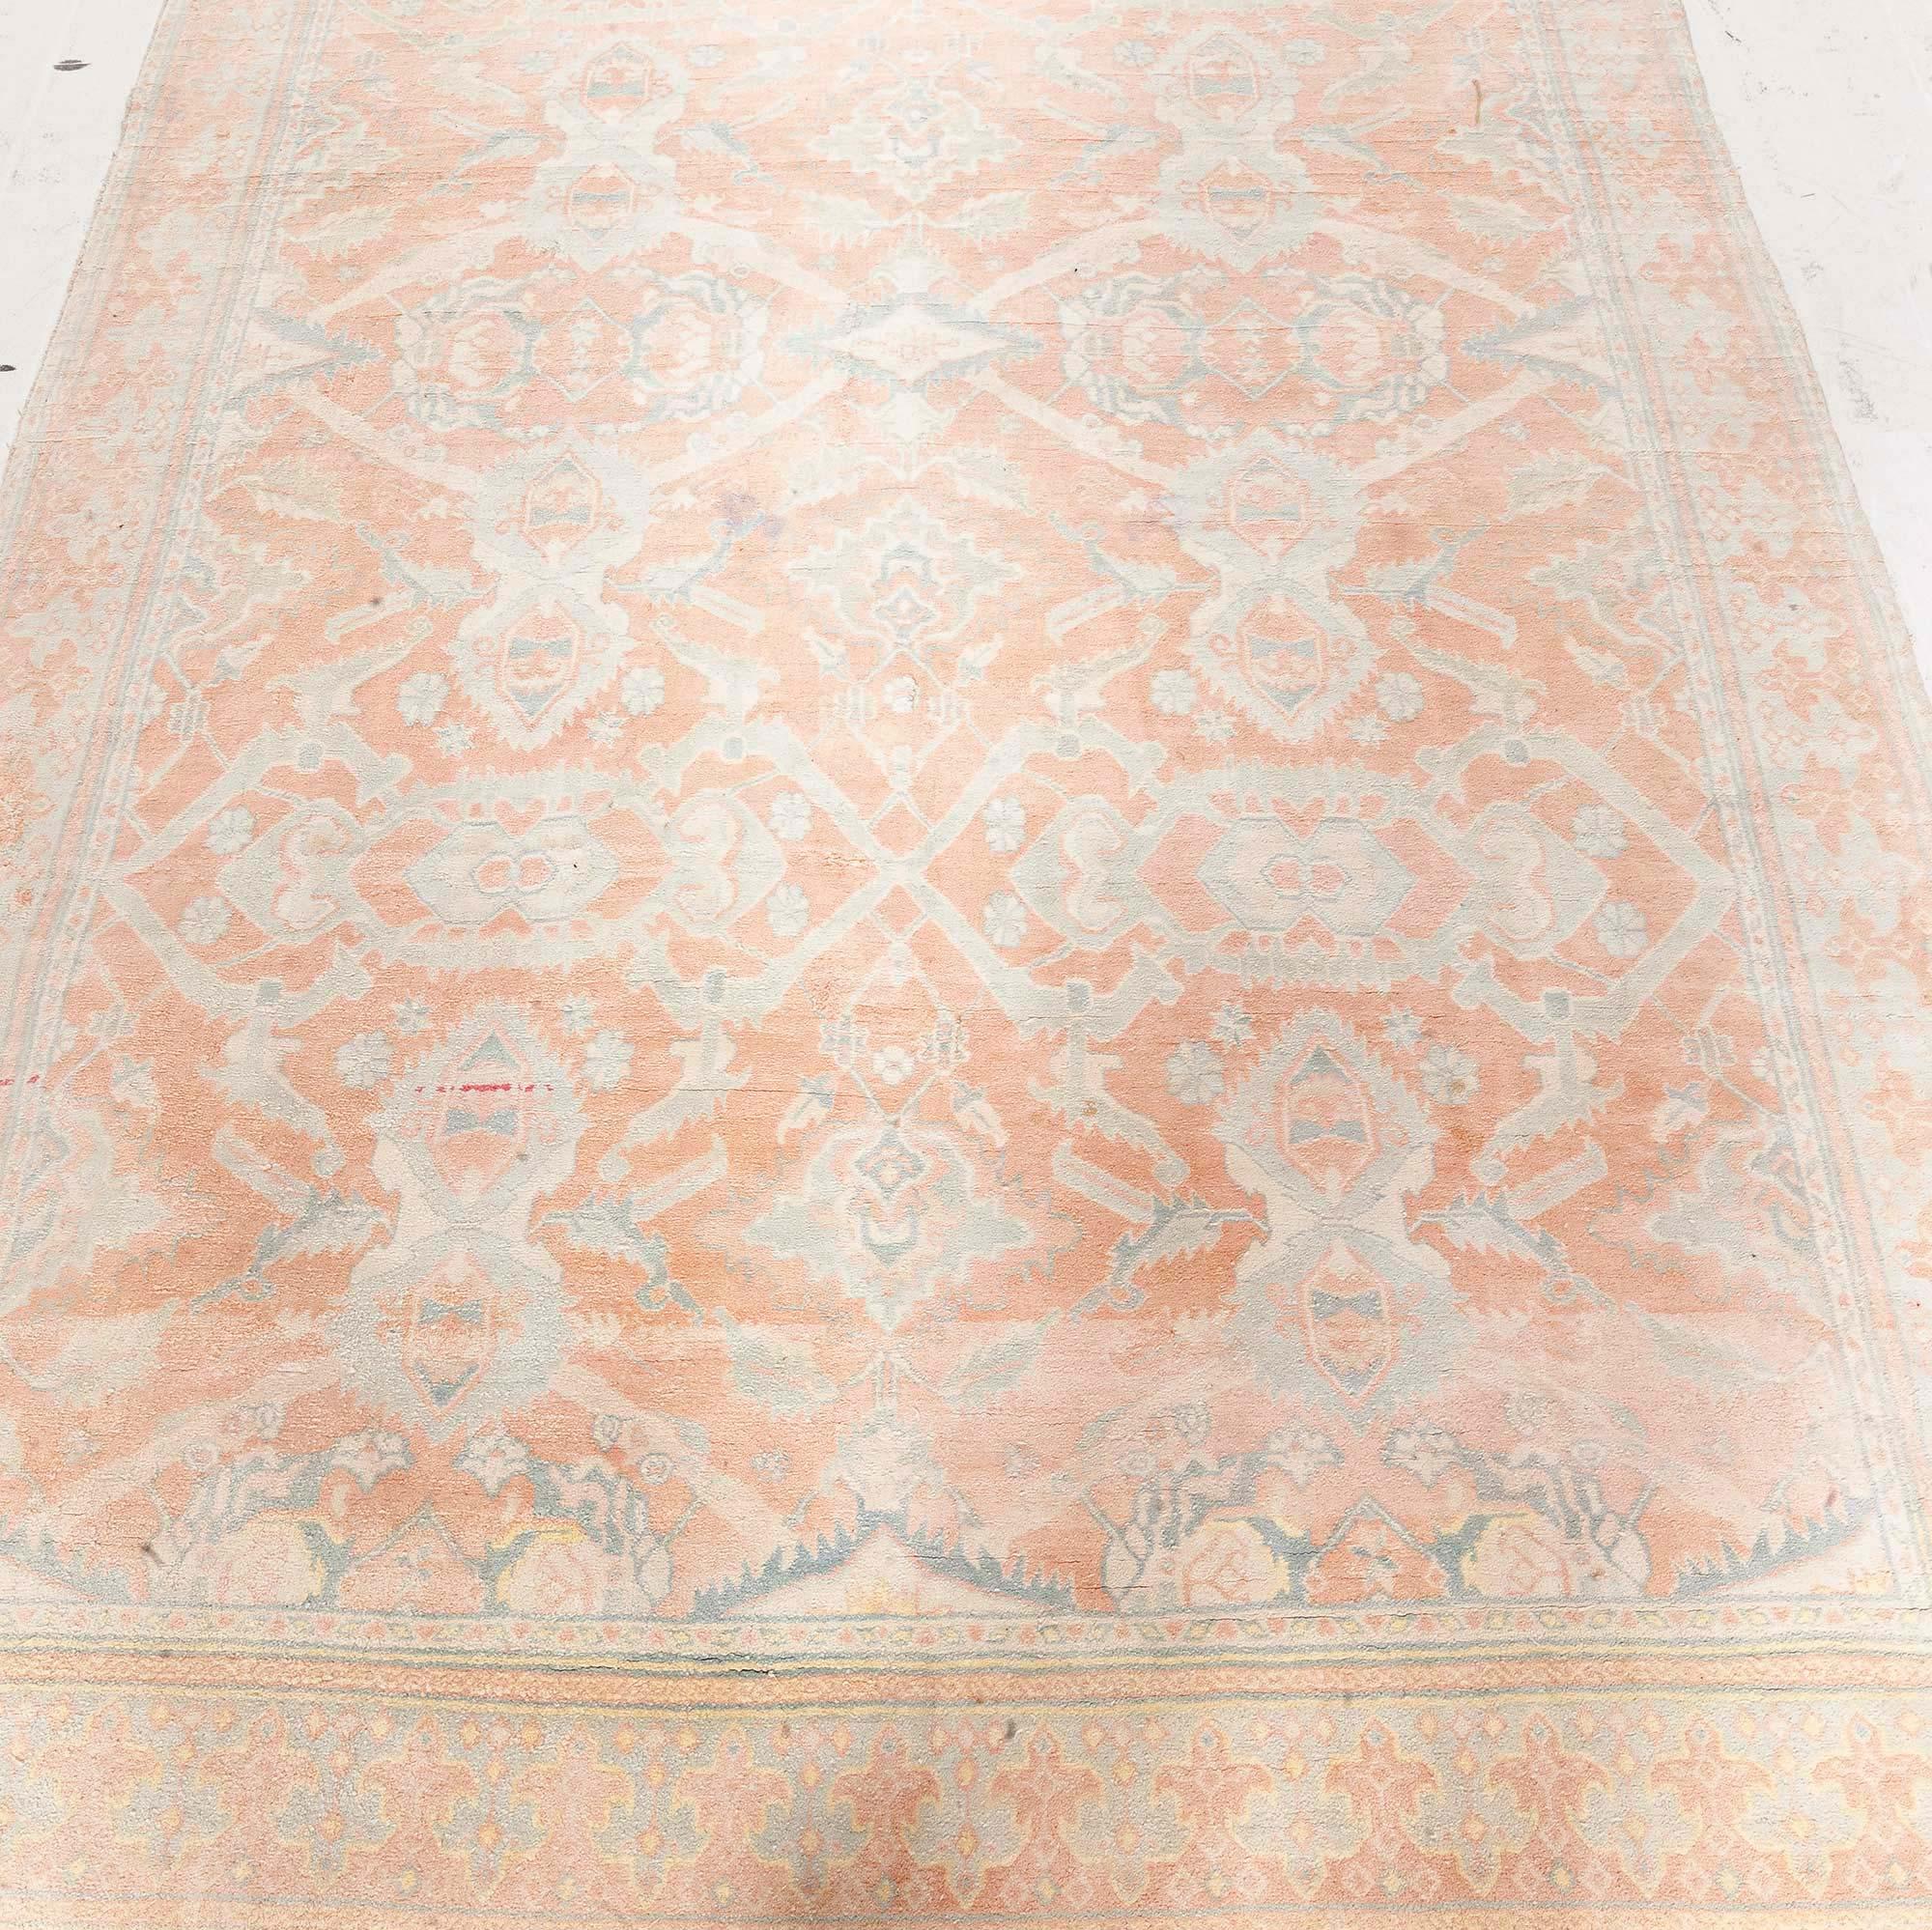 Midcentury Indian Cotton Agra Rug In Good Condition For Sale In New York, NY